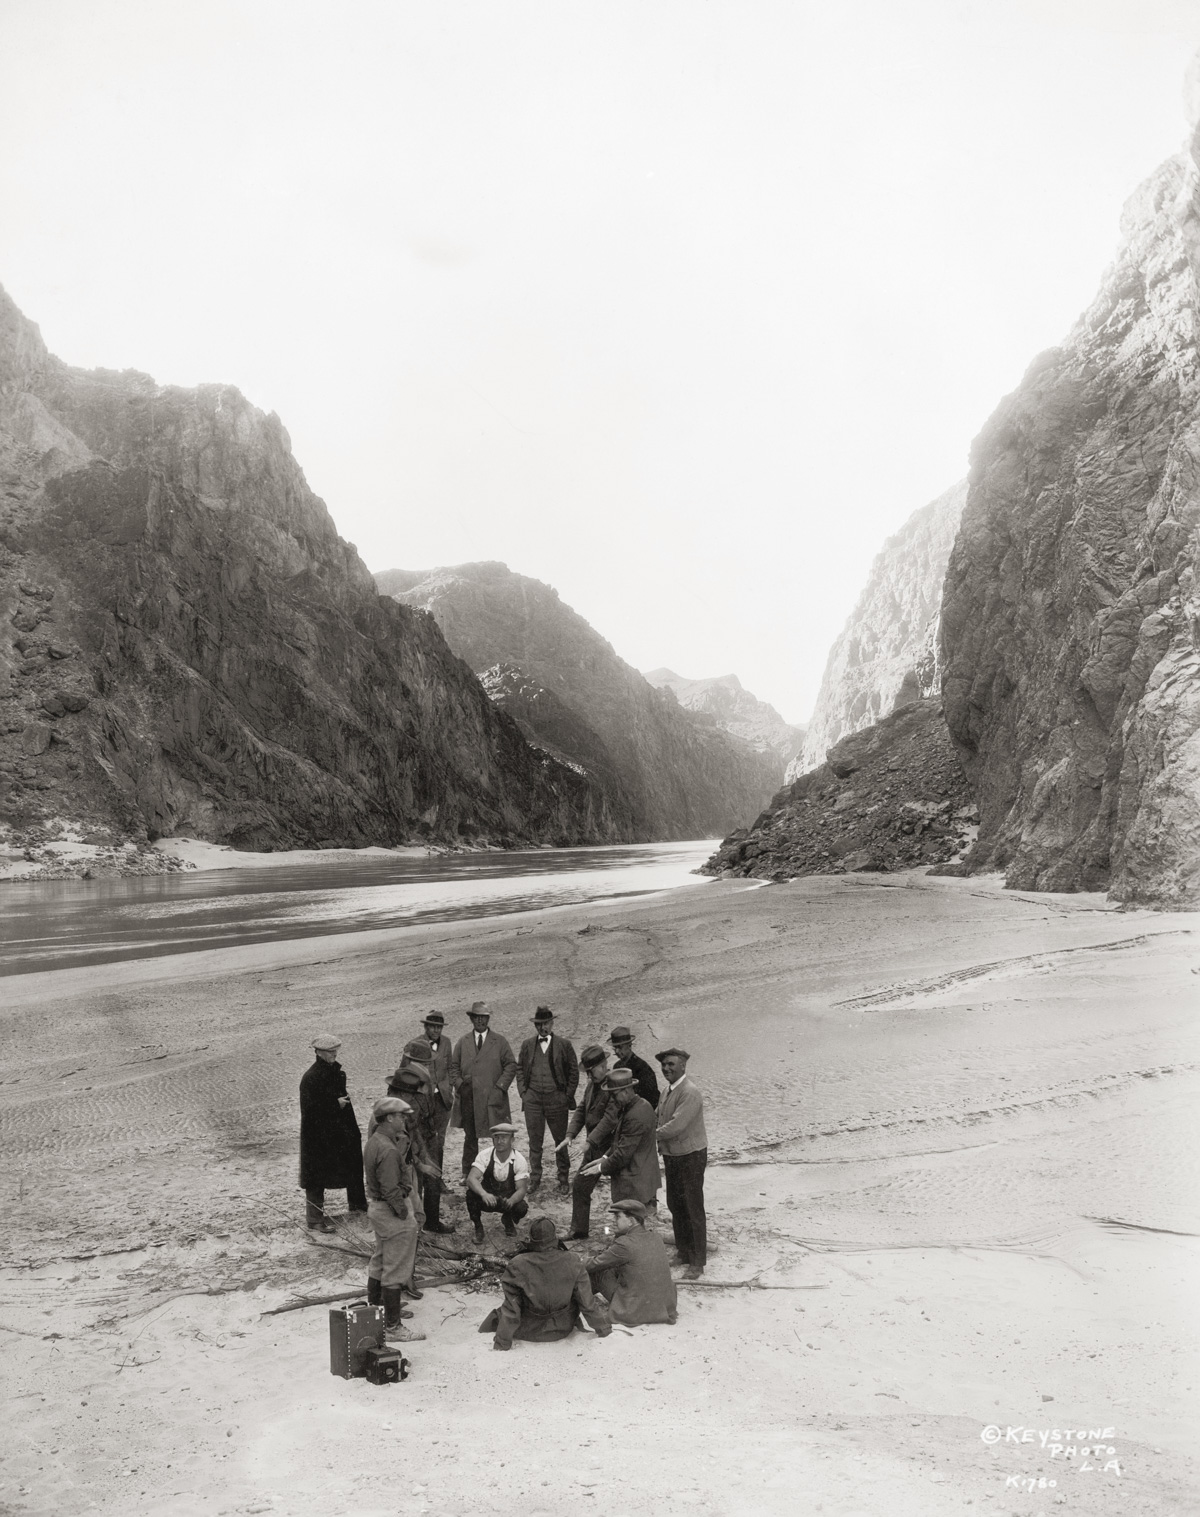 An inspection party near the proposed site of the Hoover Dam (aka Boulder Dam) in the Black Canyon of the Colorado River, circa 1928. (Photo by Keystone/FPG/Hulton Archive/Getty Images)